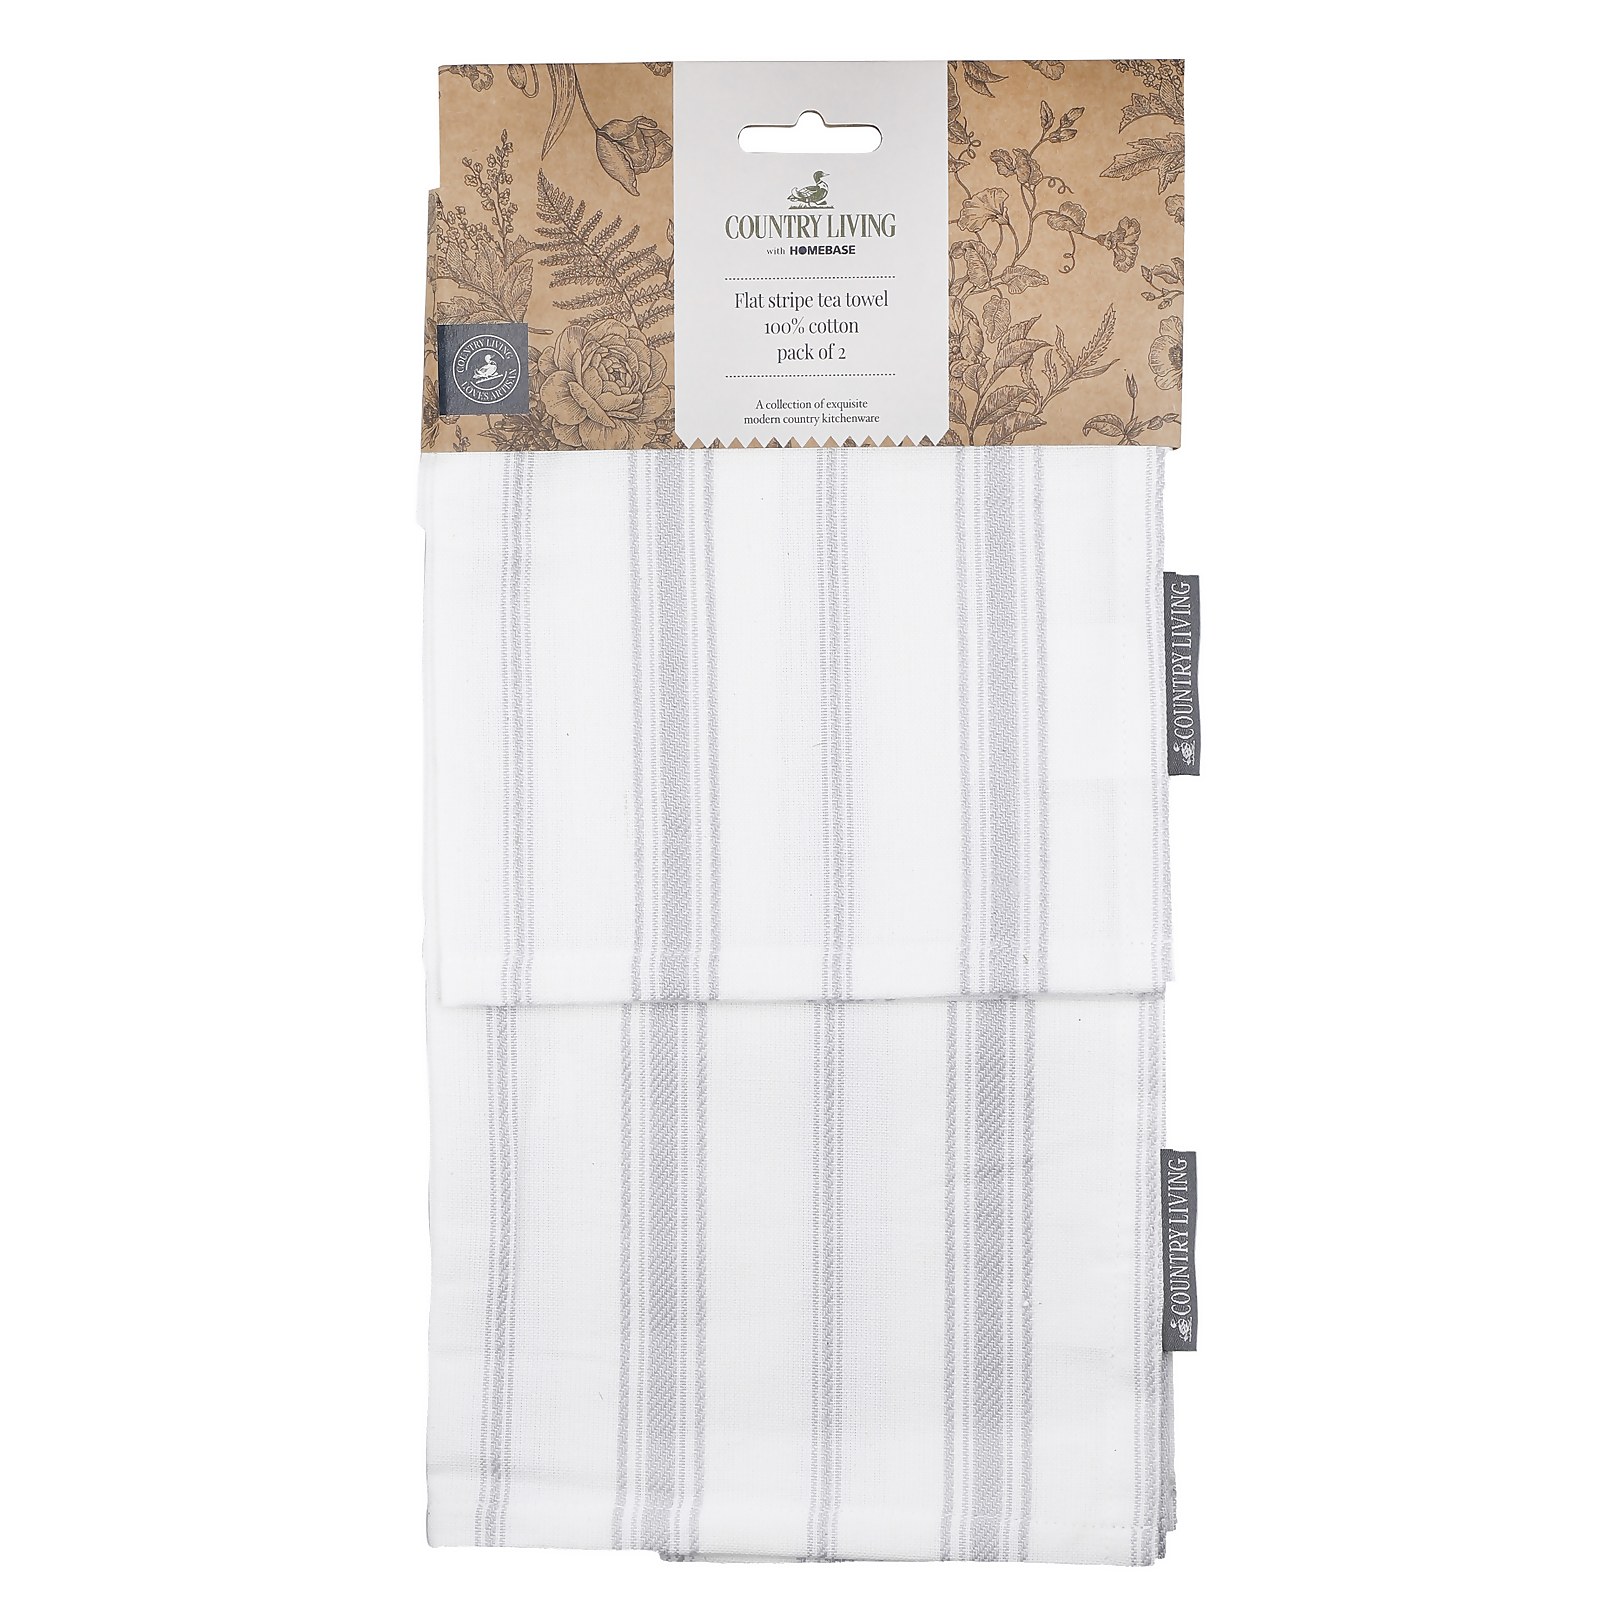 Photo of Country Living Tea Towels Woven Flat Stripe Gry - 2 Pack